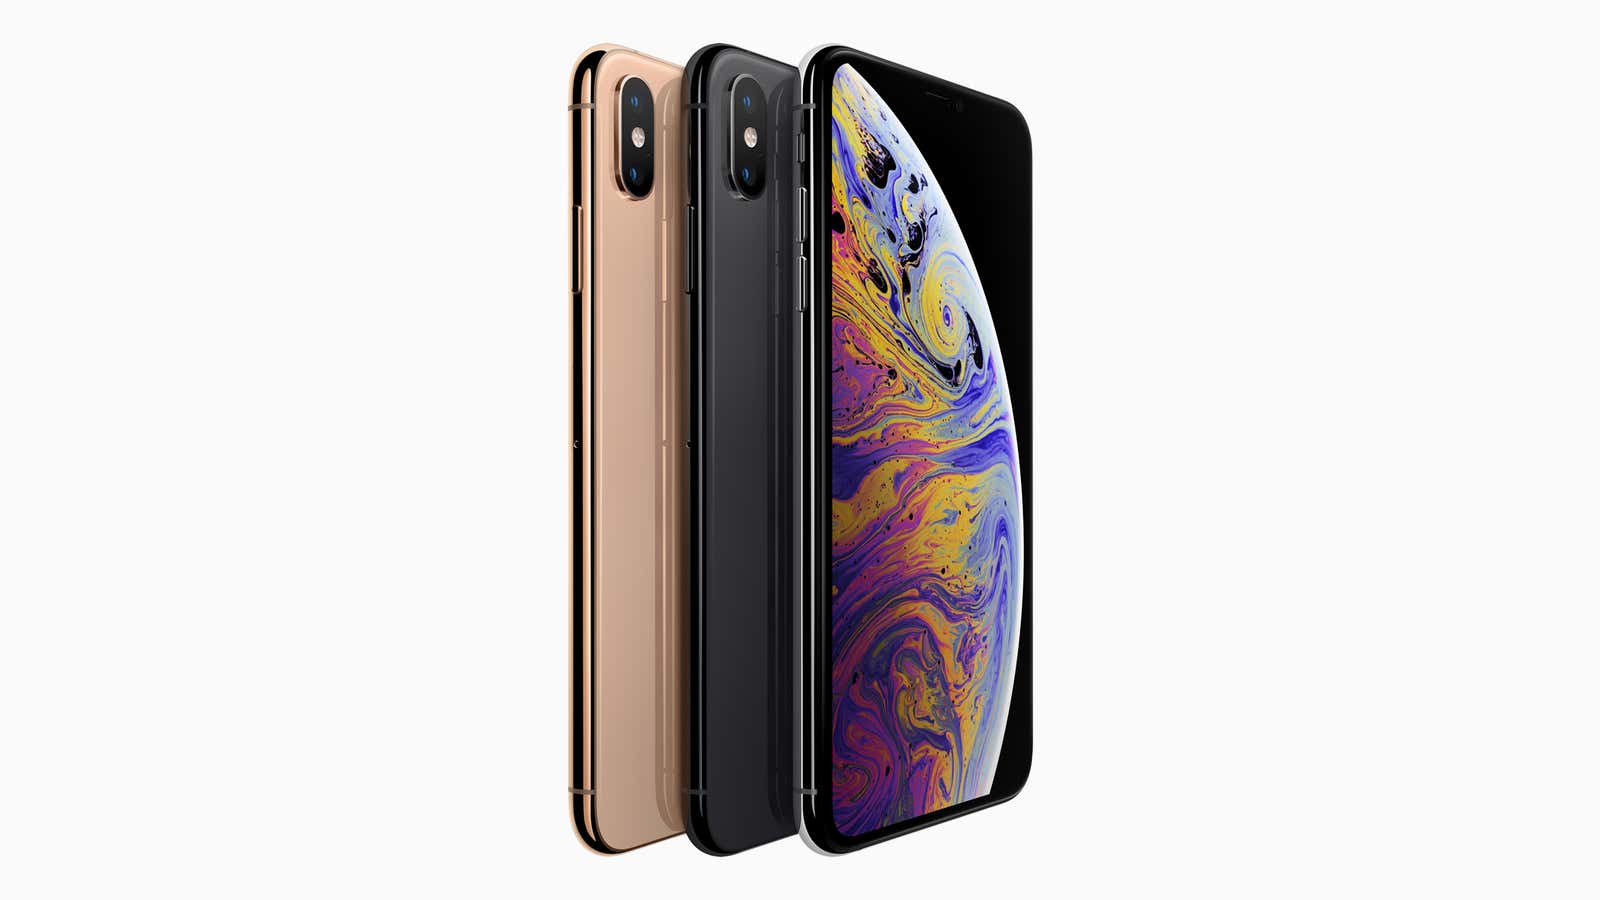 Apple’s new iPhone XS comes in three metallic shades.